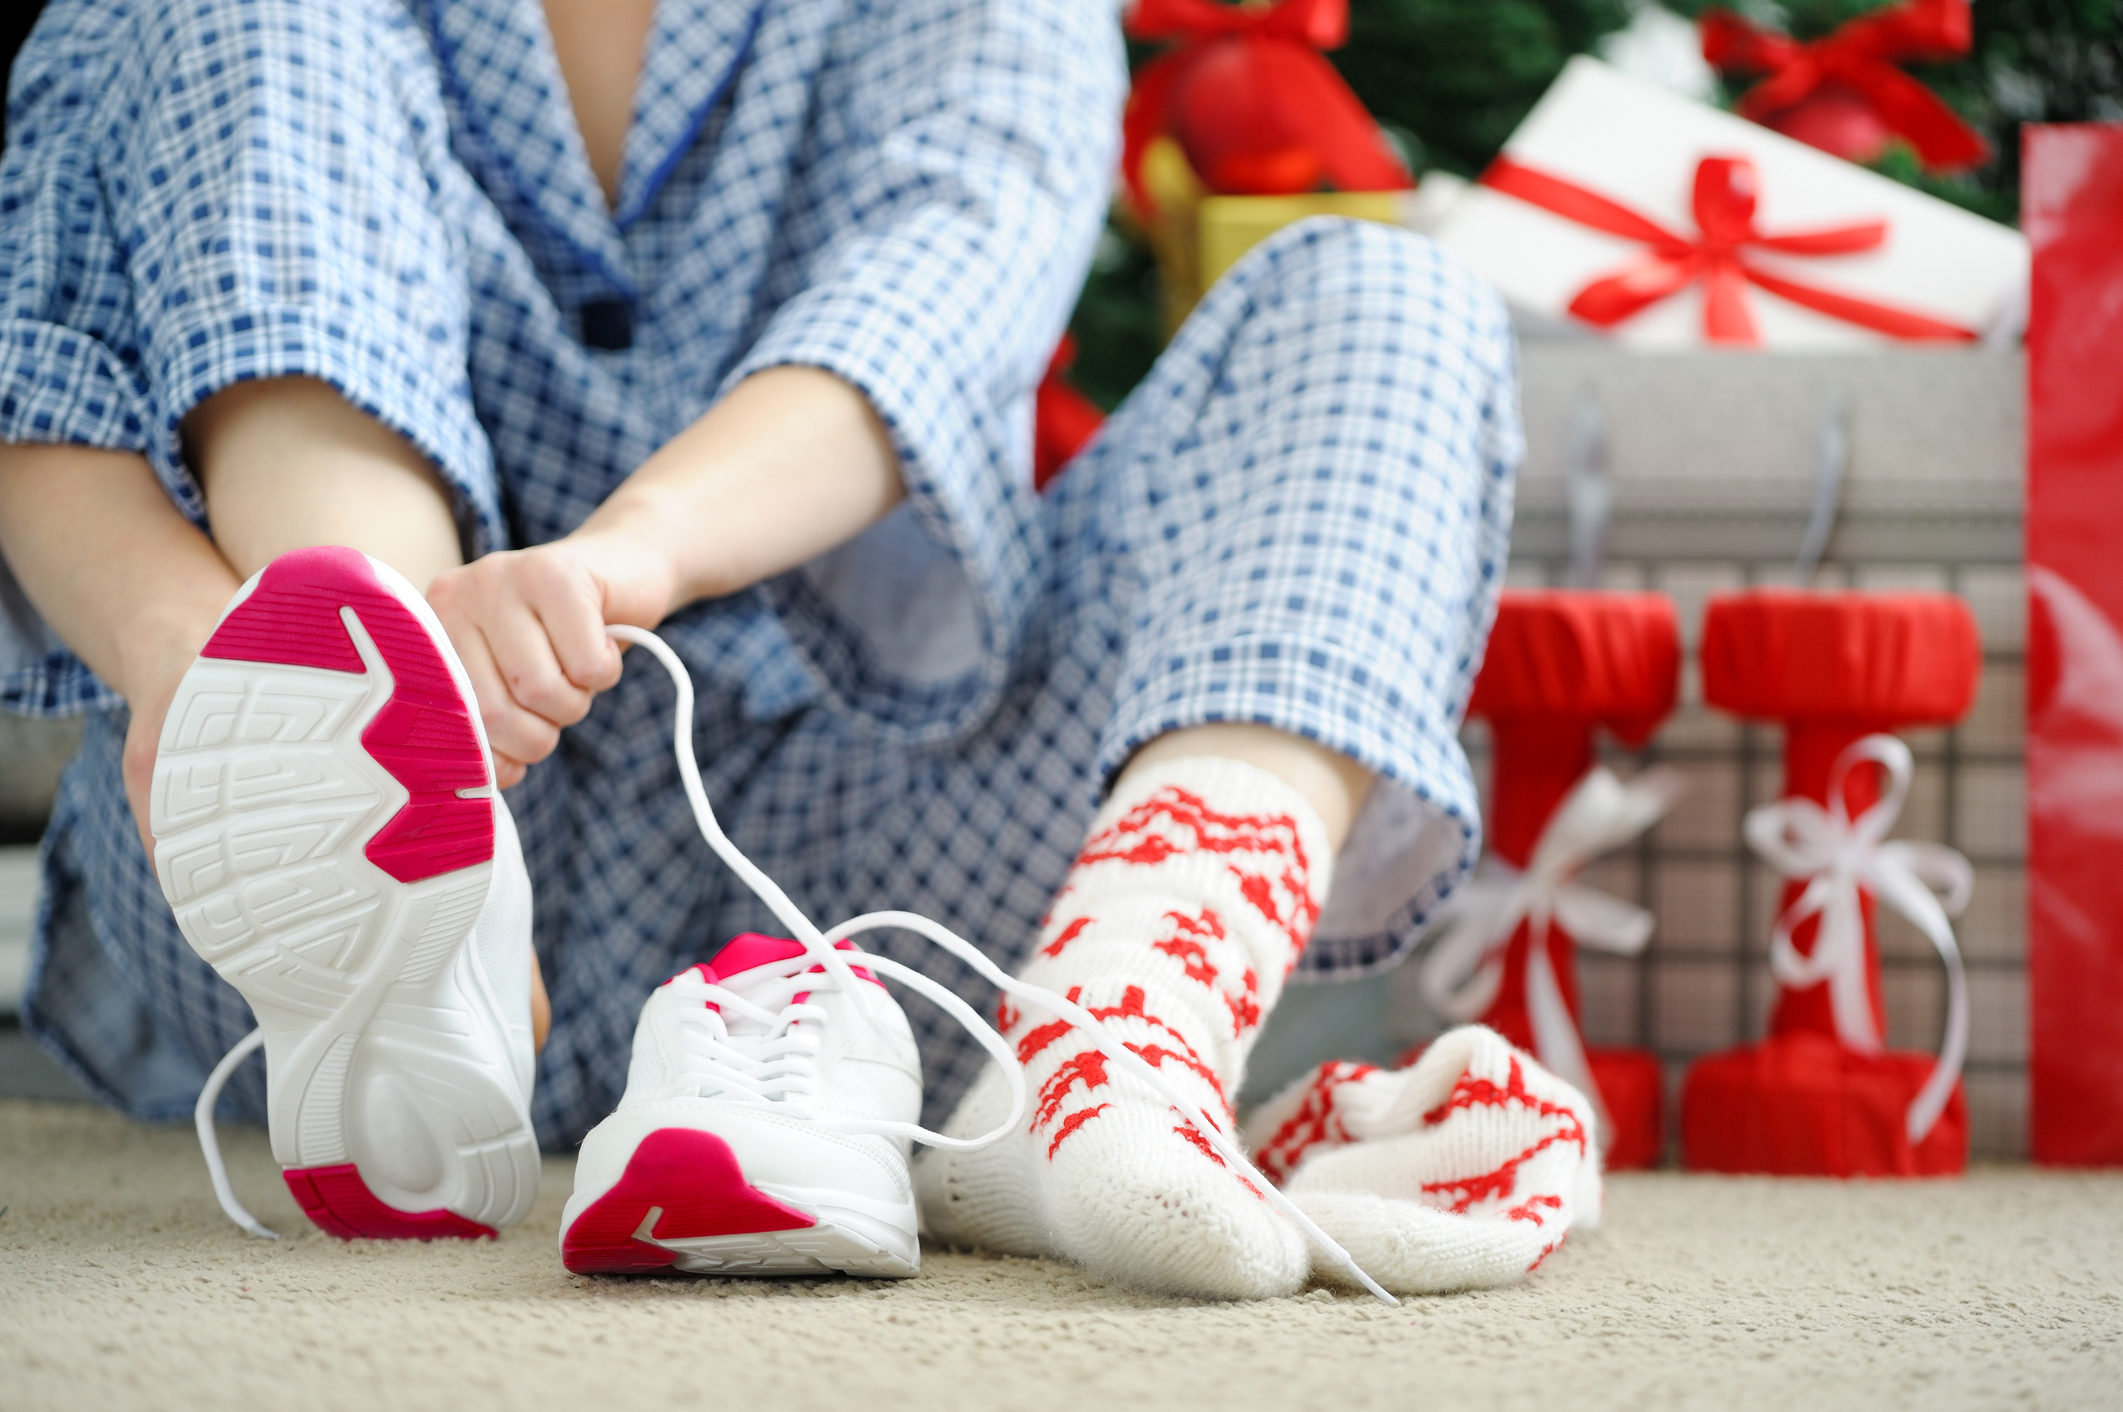 10-Minute Exercises to Stay Well this Holiday Season